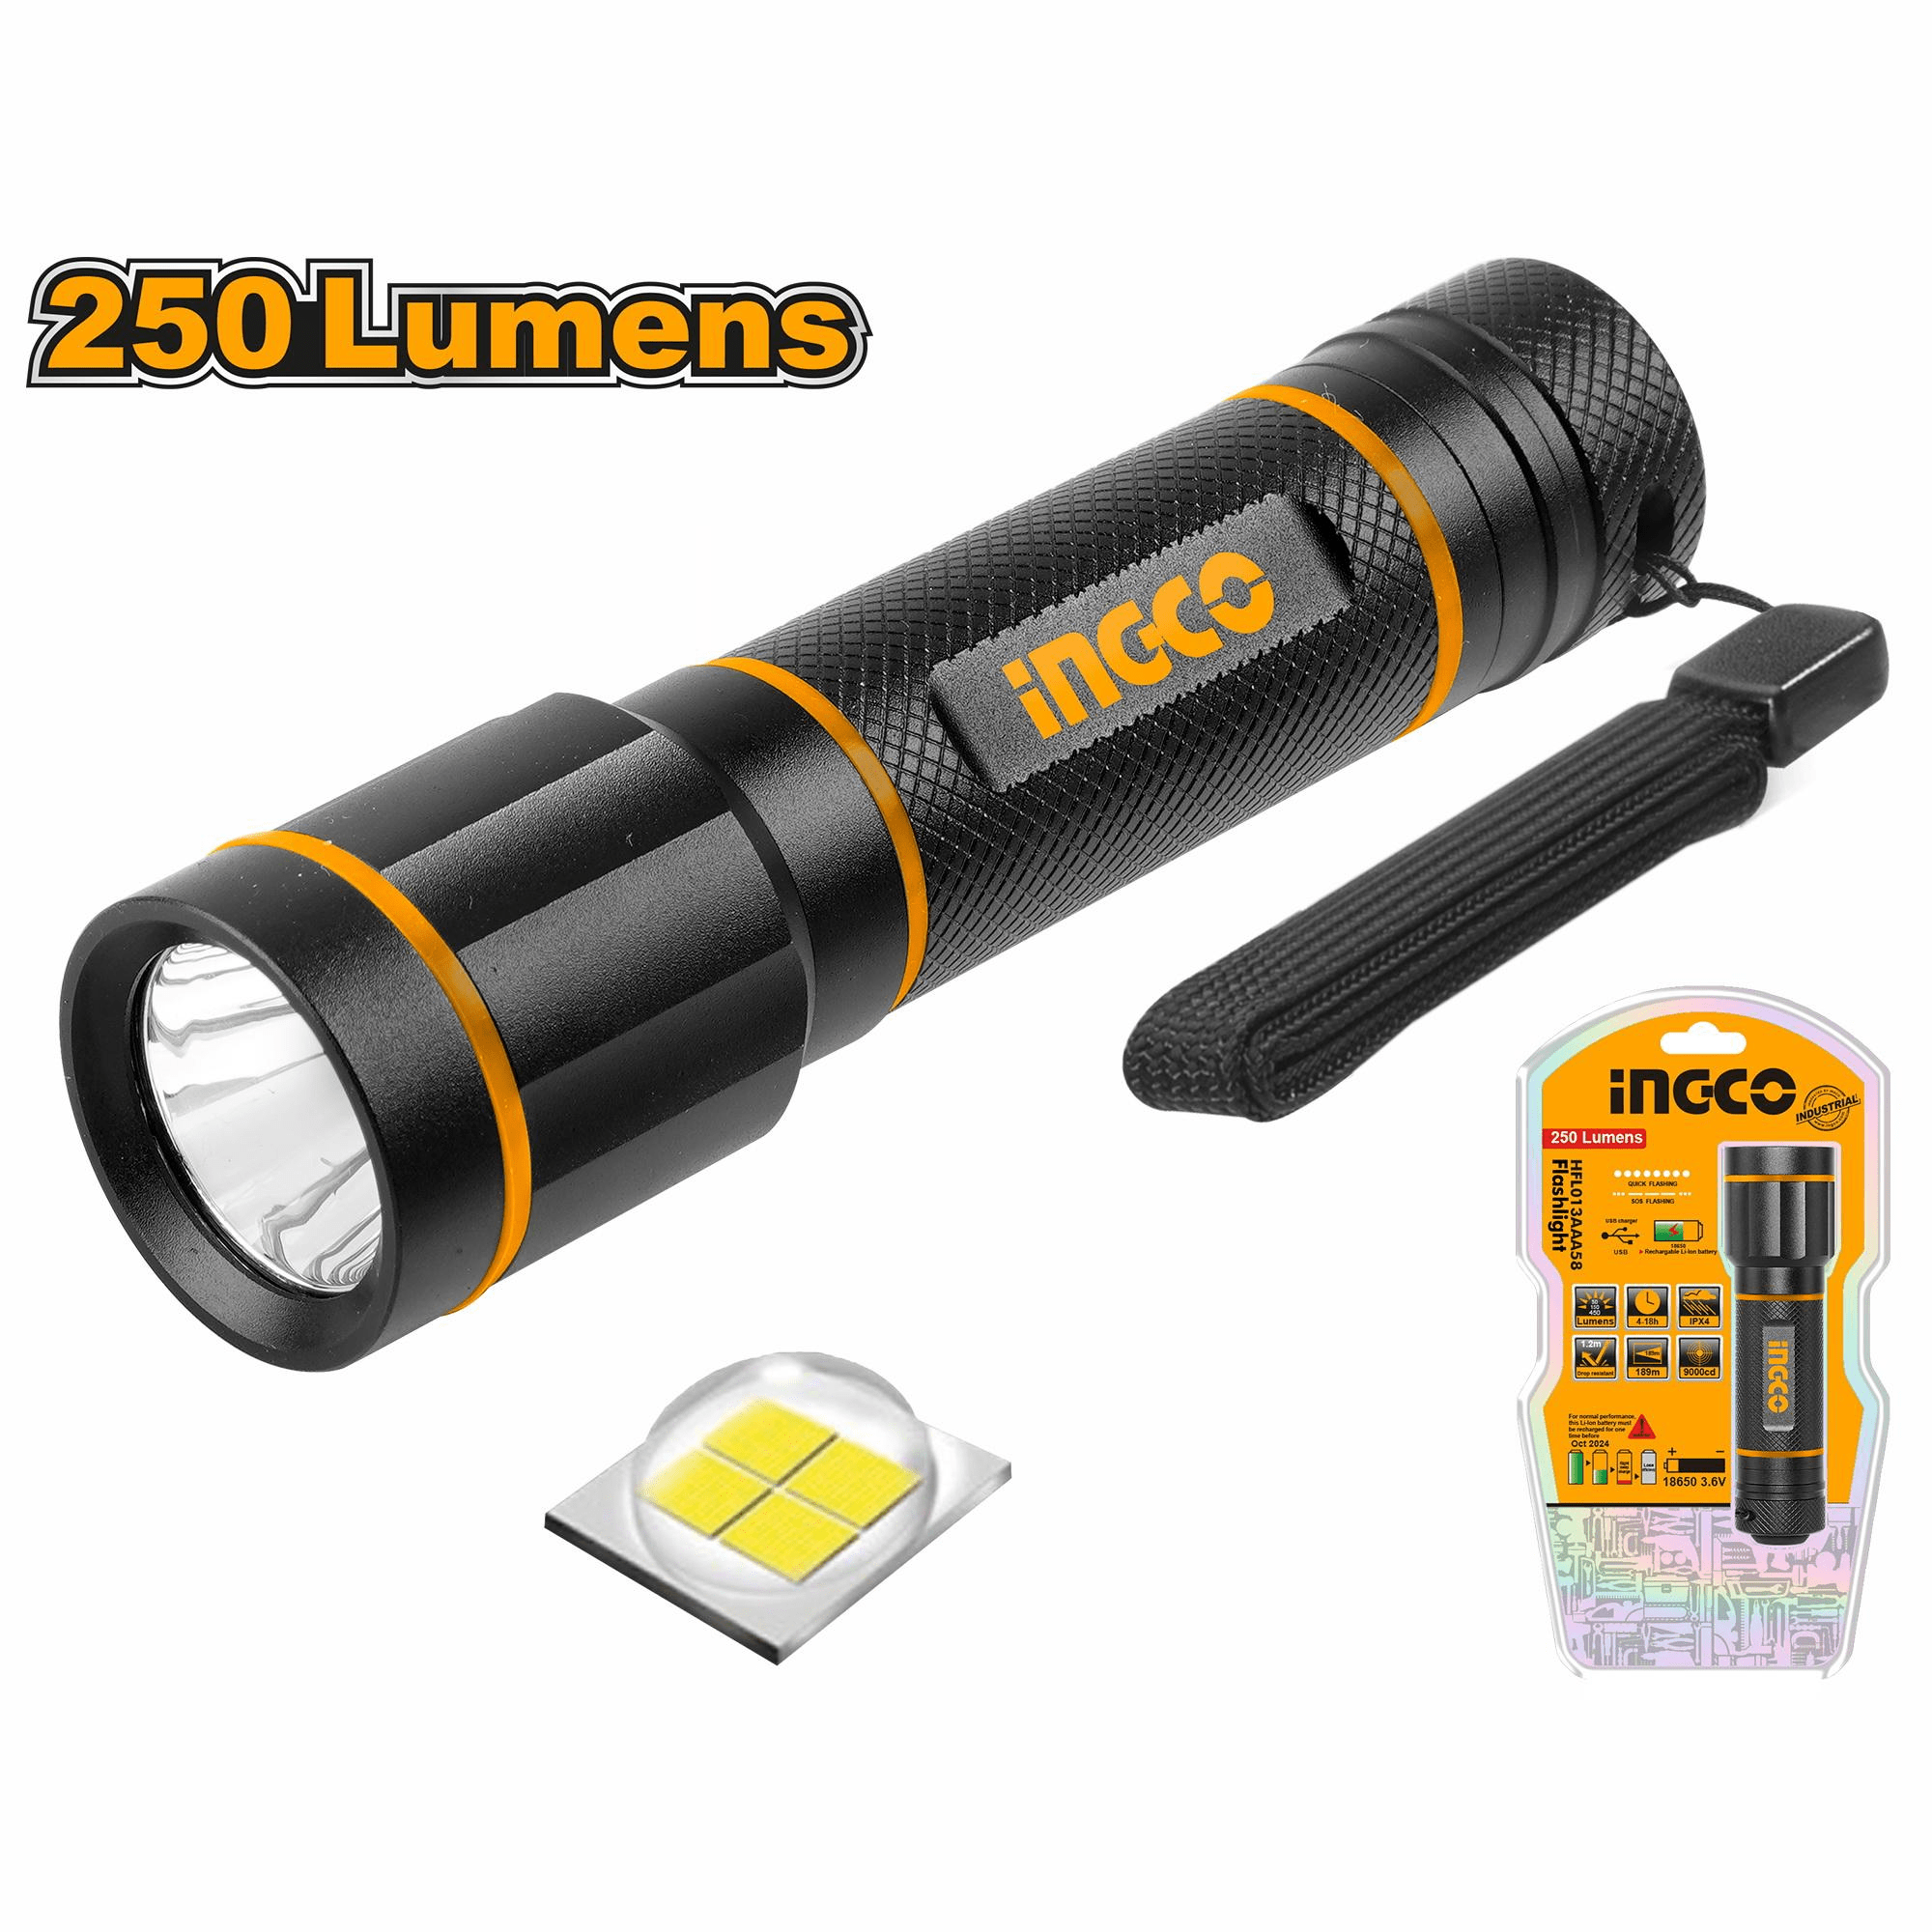 Ingco Waterproof Rechargeable LED Flashlight 250 Lumens HFL013AAA58 | Supply Master Accra, Ghana Specialty Safety Equipment Buy Tools hardware Building materials